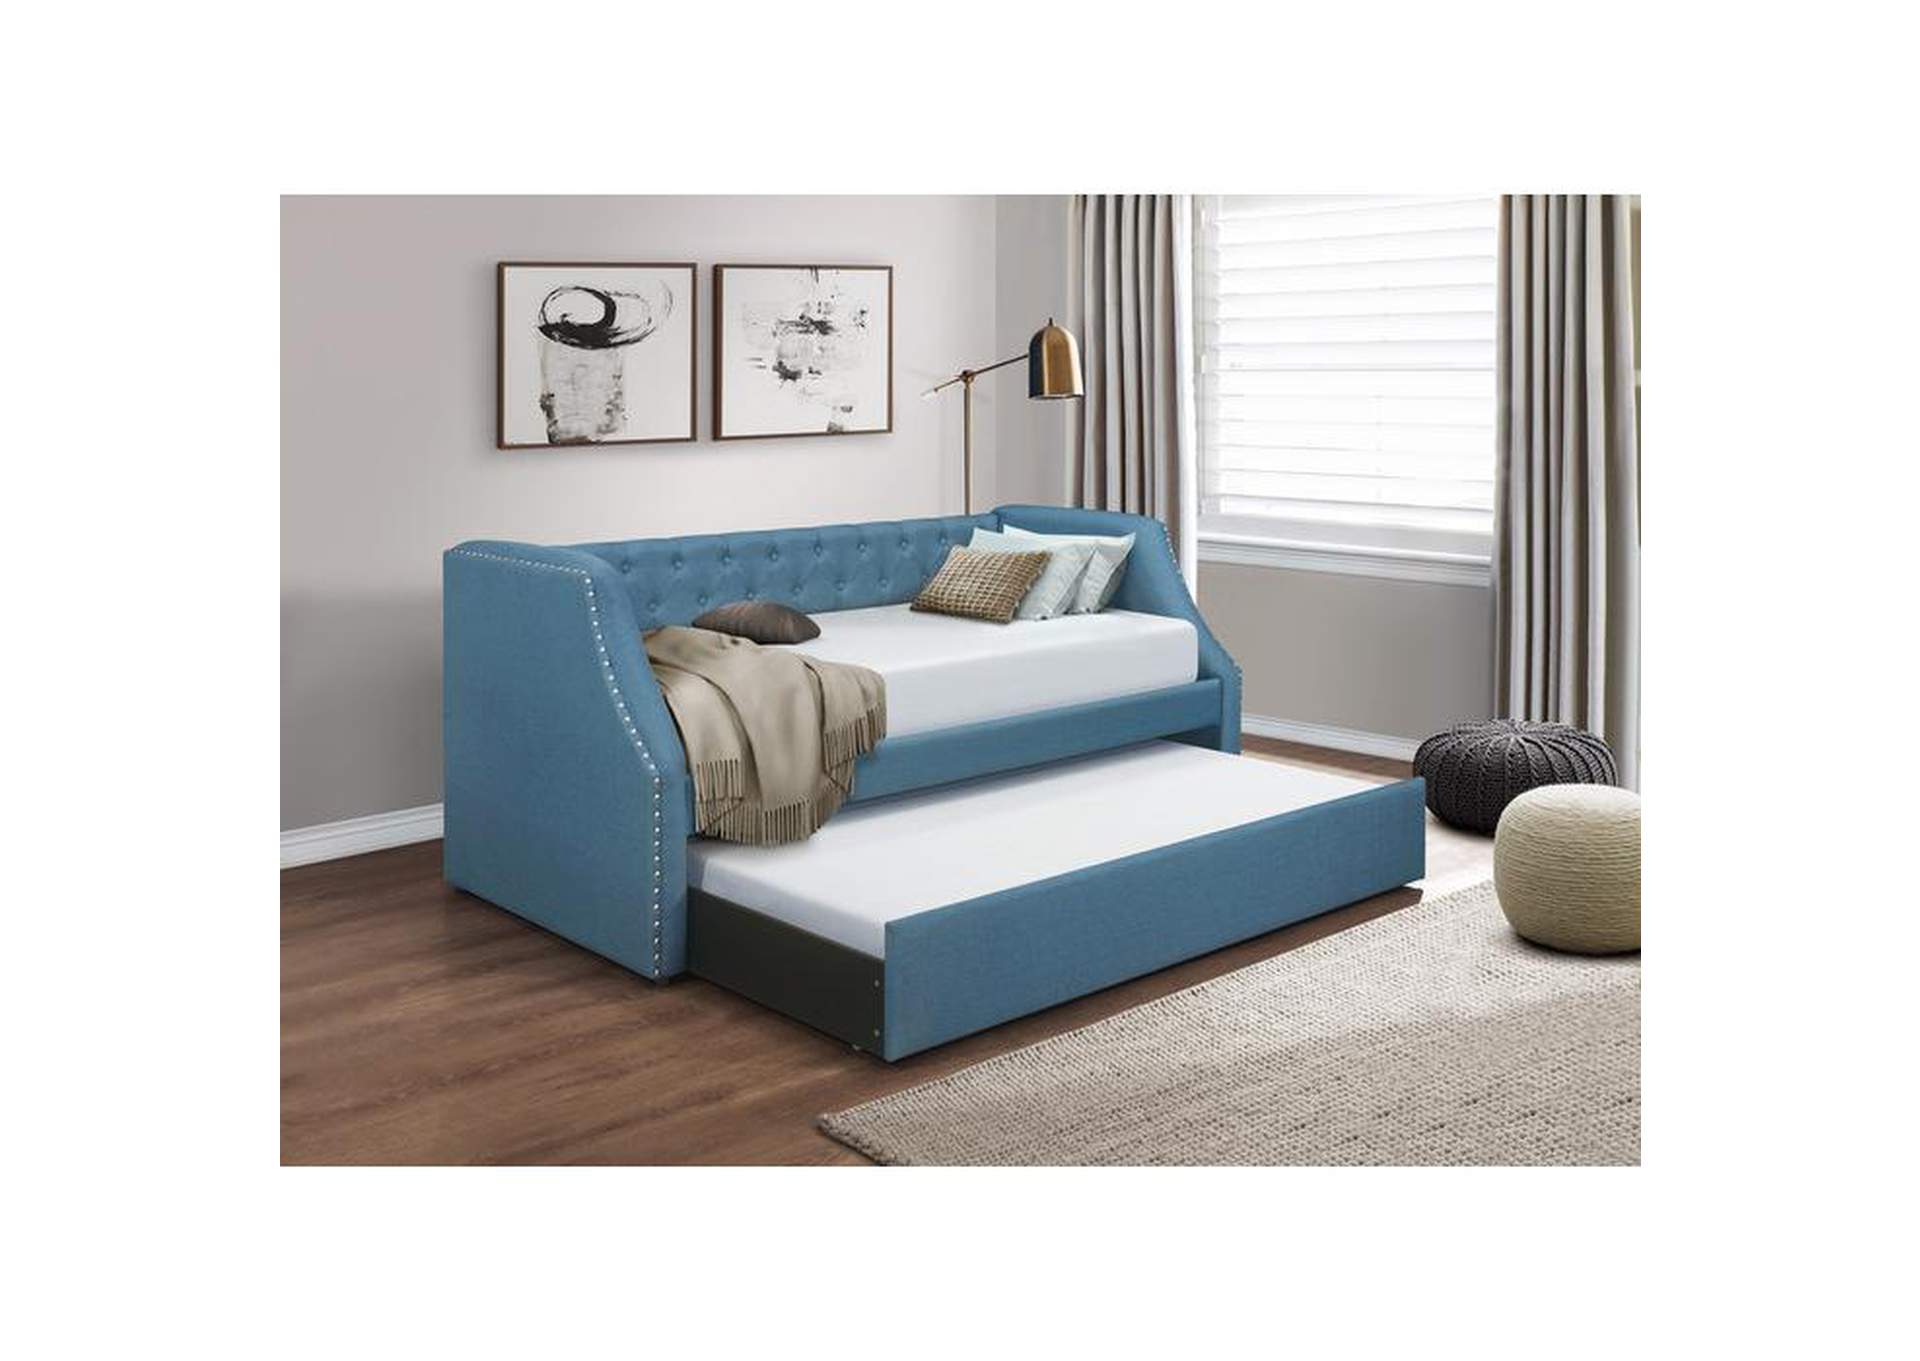 Corrina (2) Daybed with Trundle,Homelegance